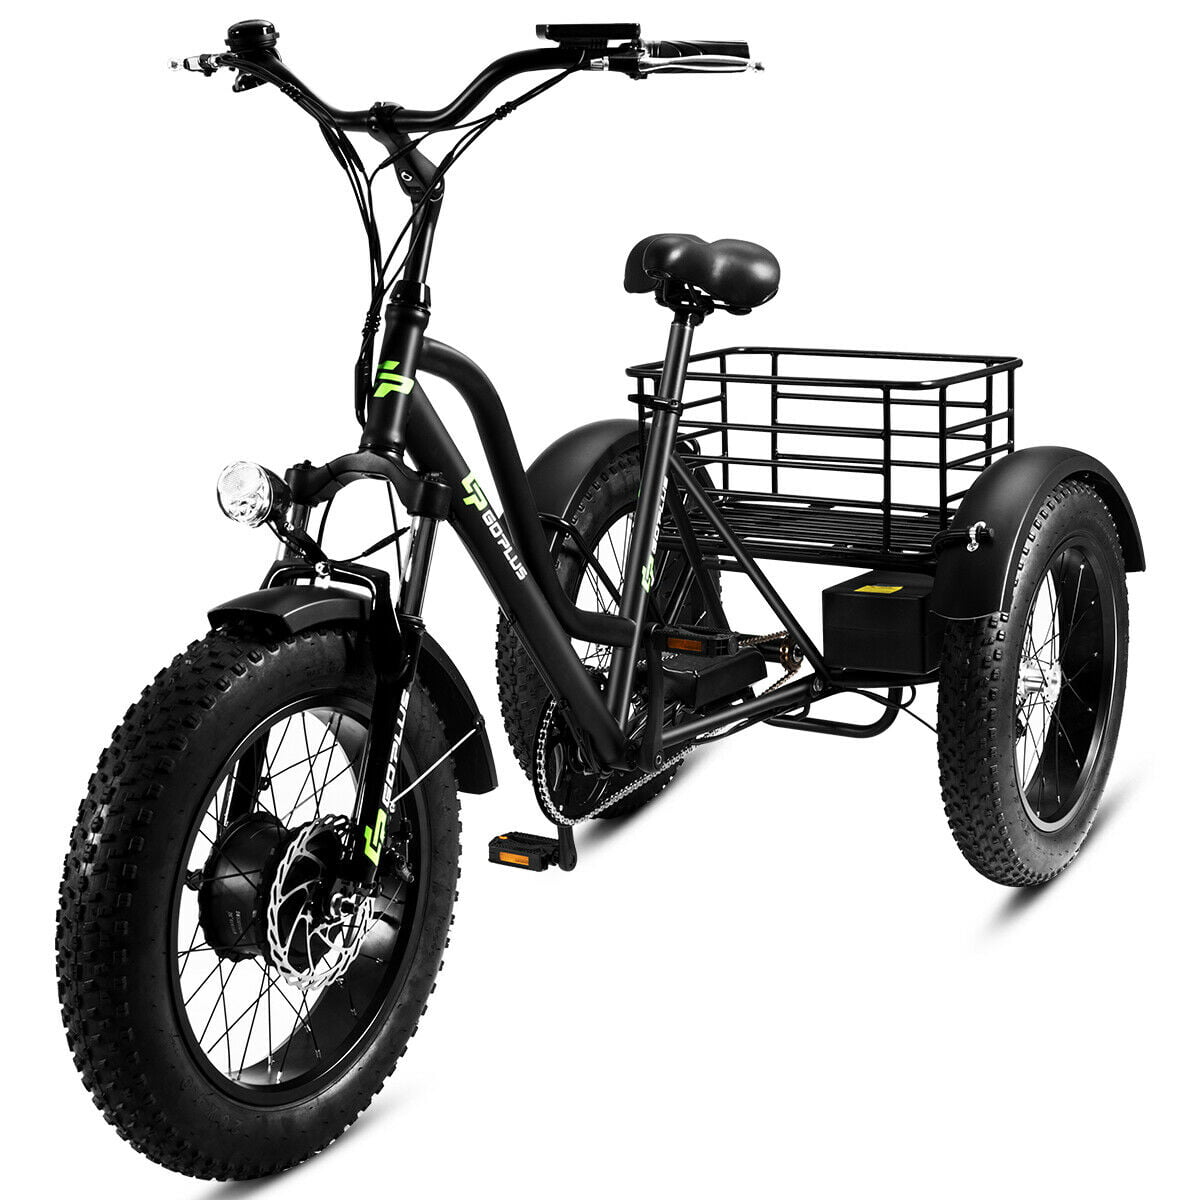 canadian tire tricycle for adults